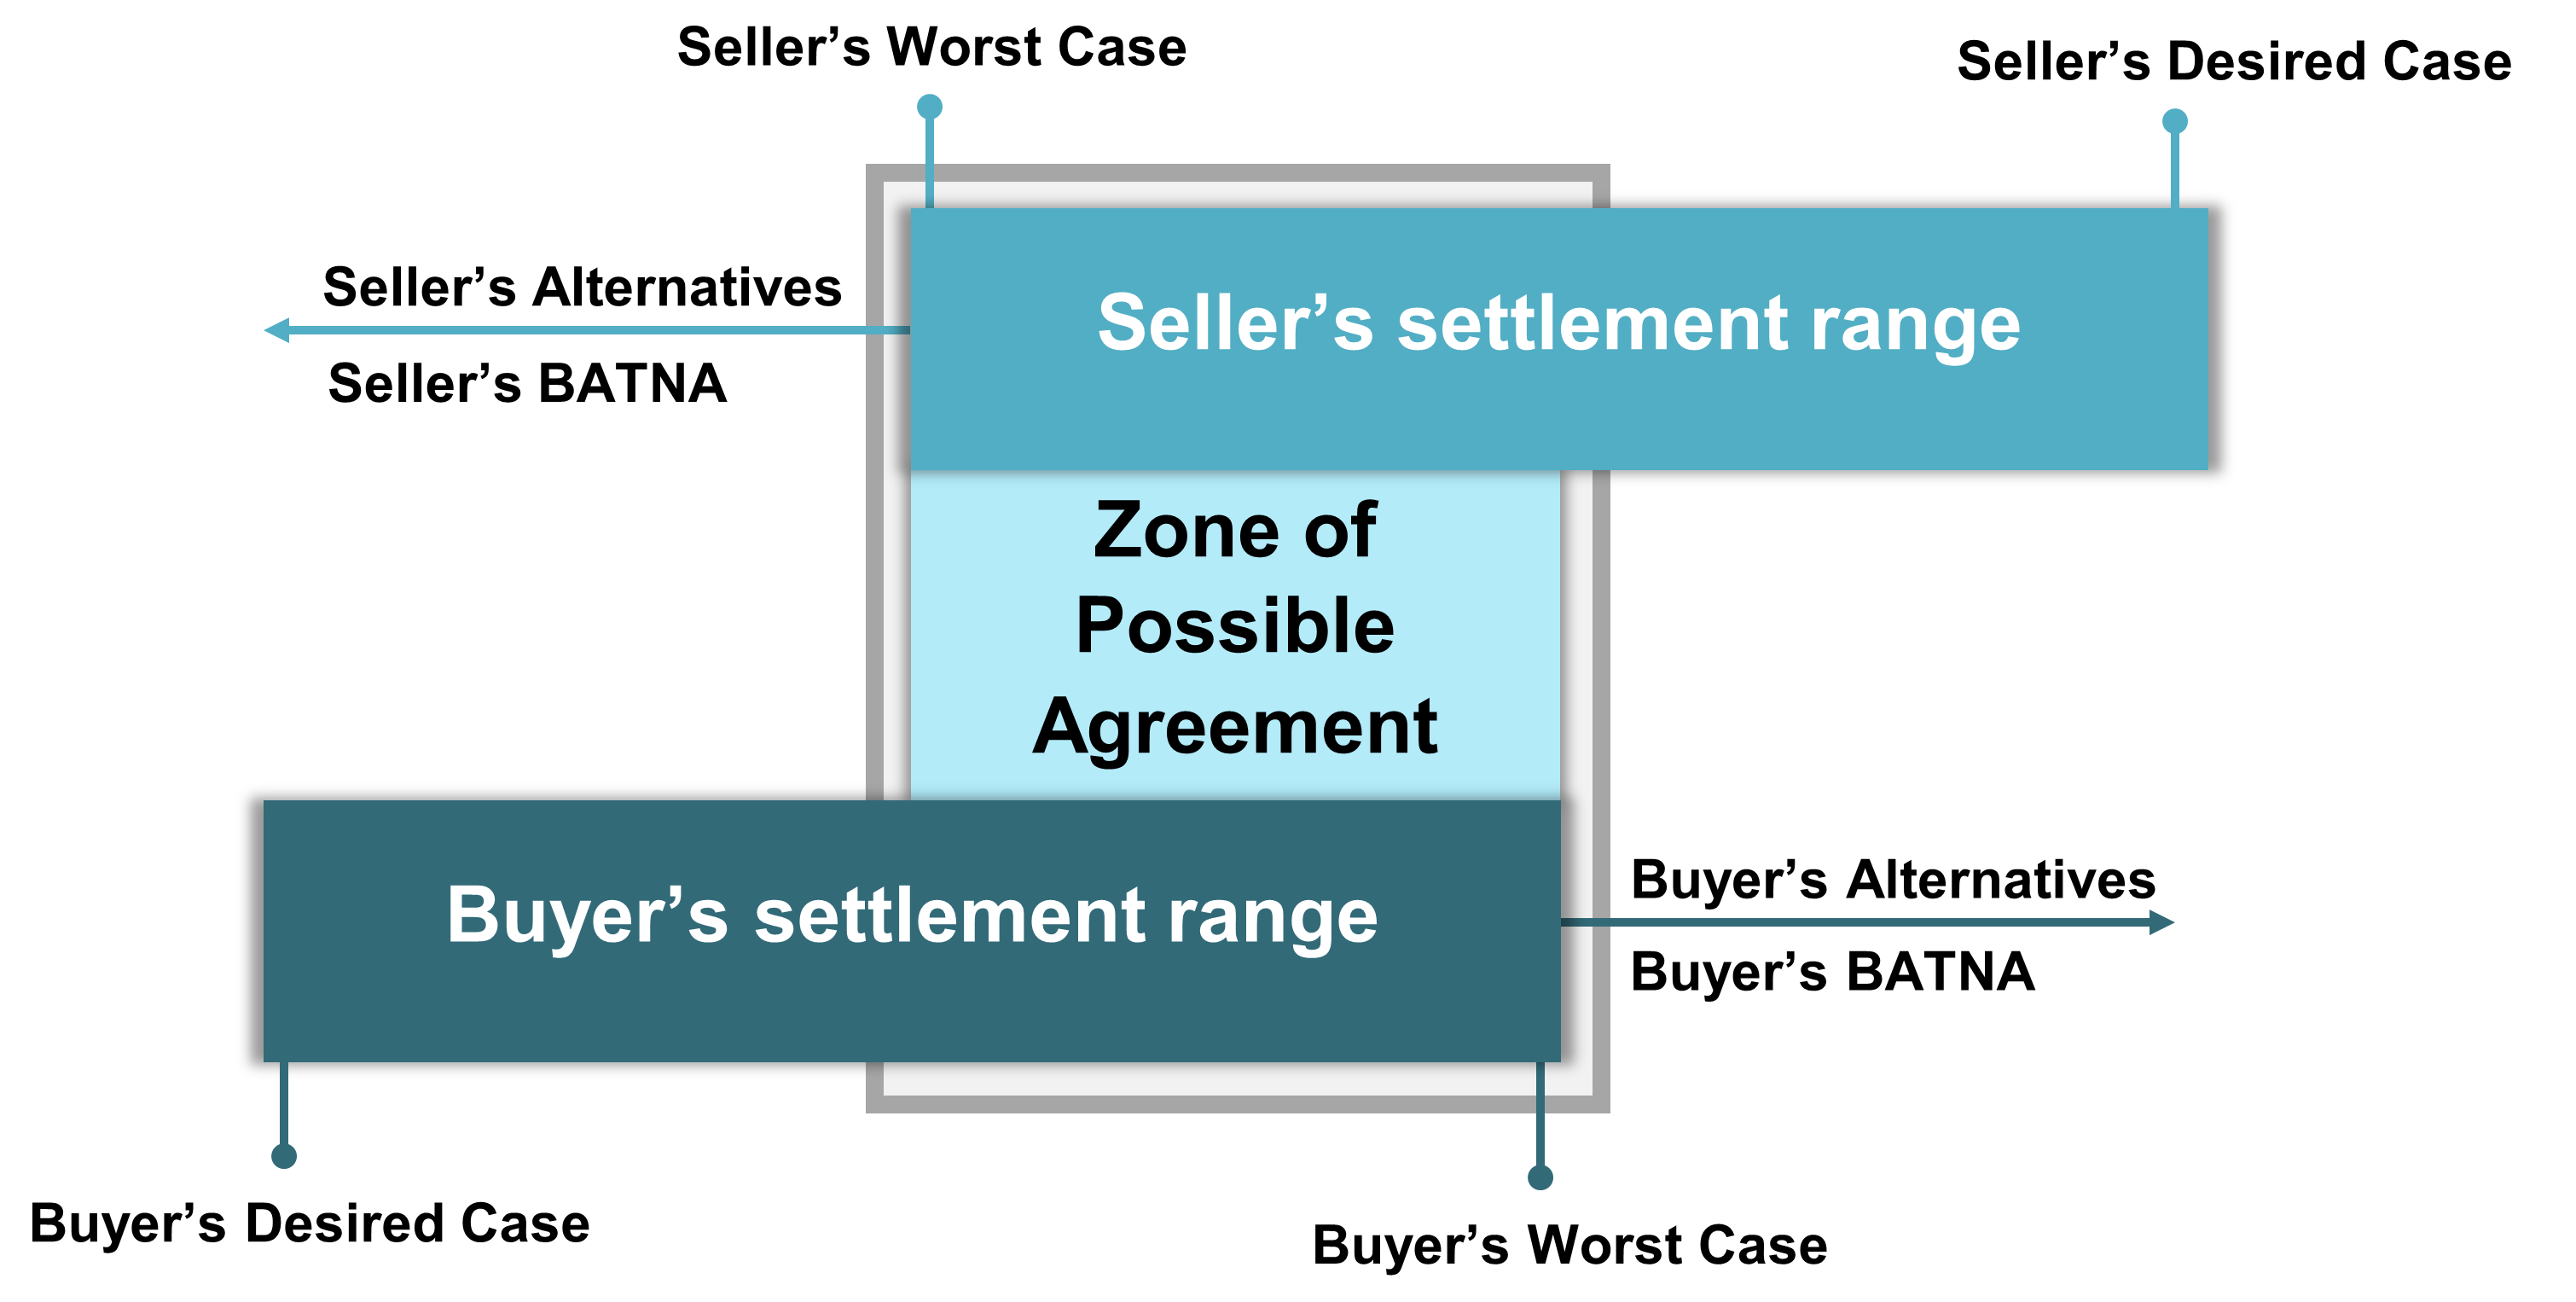 An illustration depicting the distributive bargaining range and agreement zone